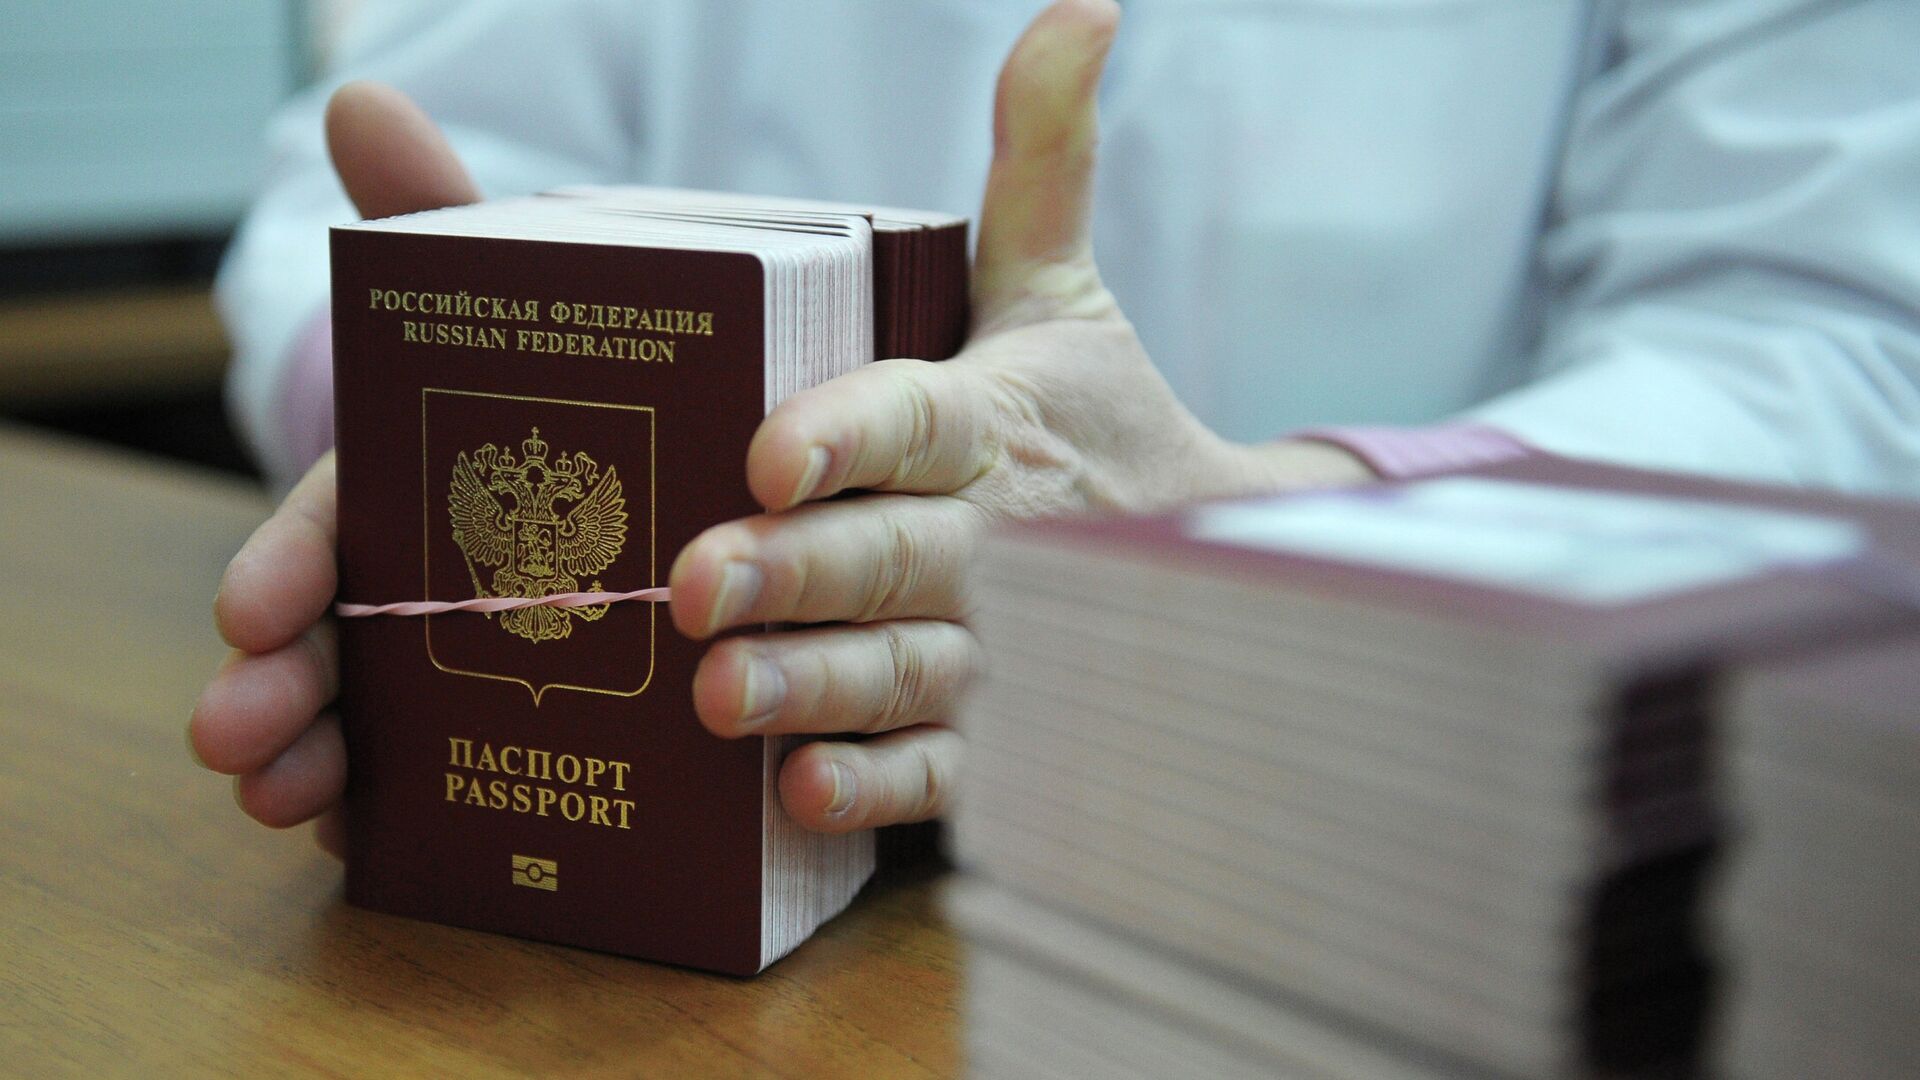 News conference on launch of biometric passports for Russian citizens - Sputnik International, 1920, 04.08.2022